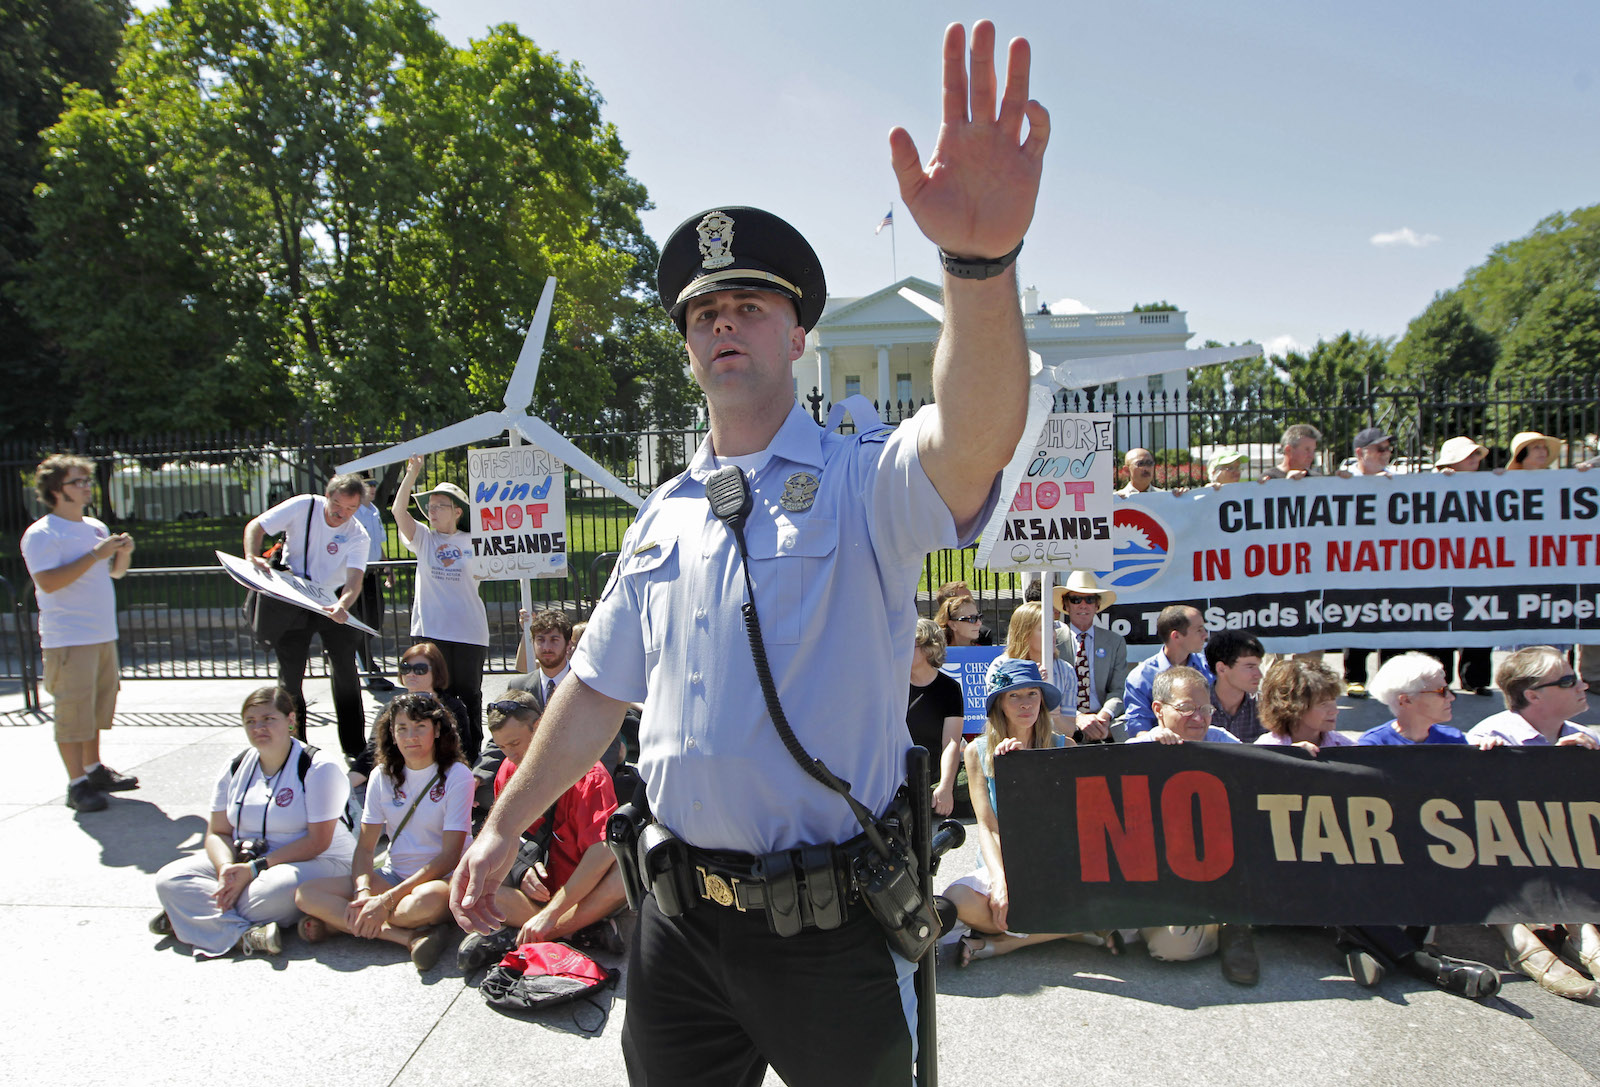 a man in a security or police uniform holds his hand up in front of a gathered group of pipeline protesters